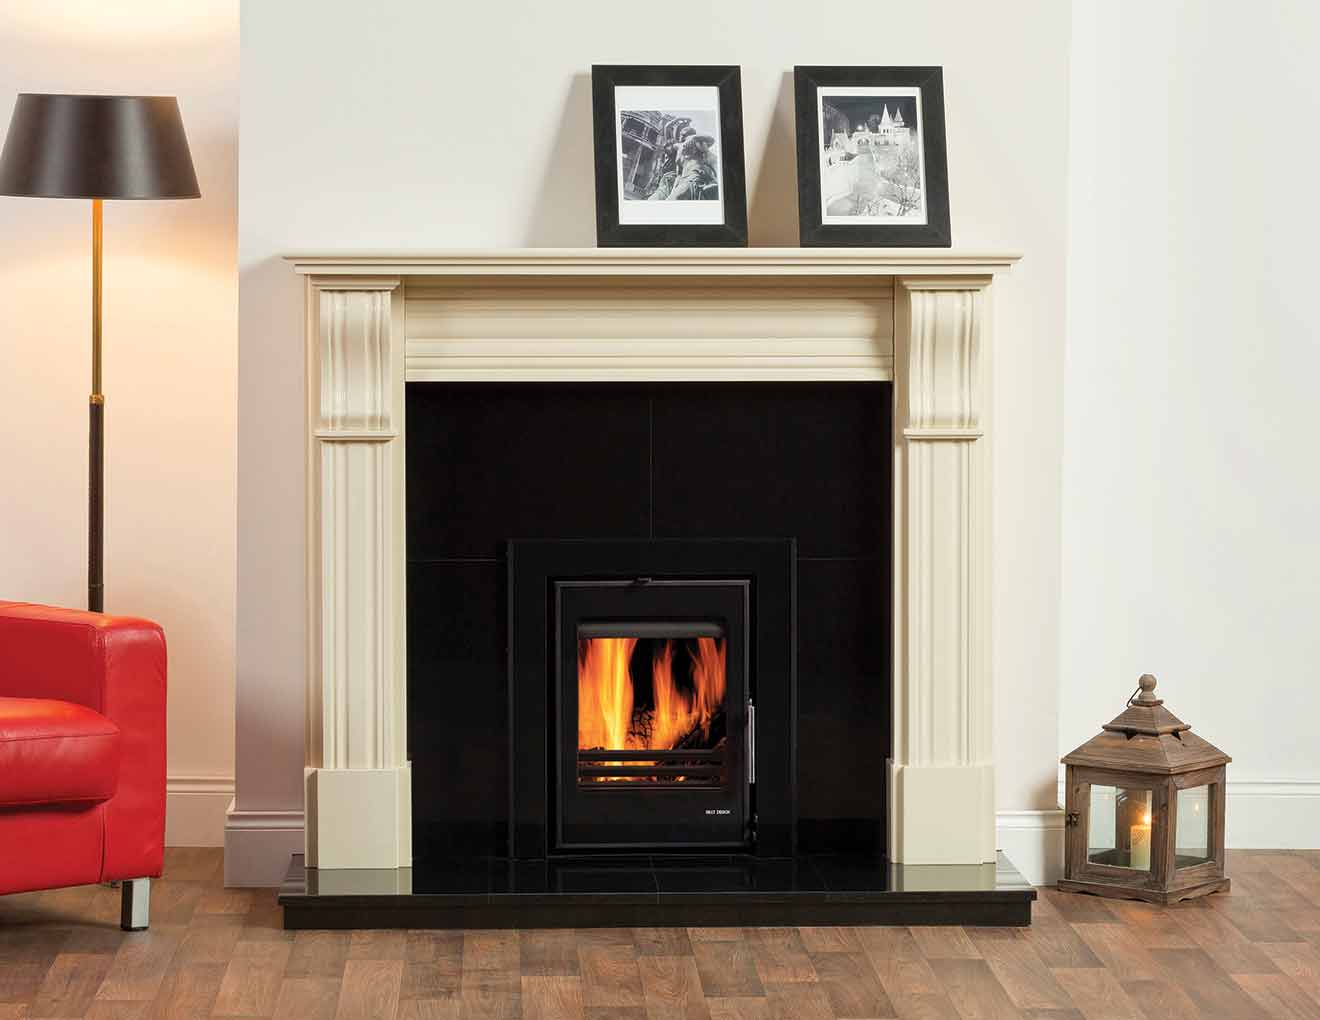 Dublin Corbel Ivory Pearl Fireplace Bundle, including Black Granite Hearth and Back Panel